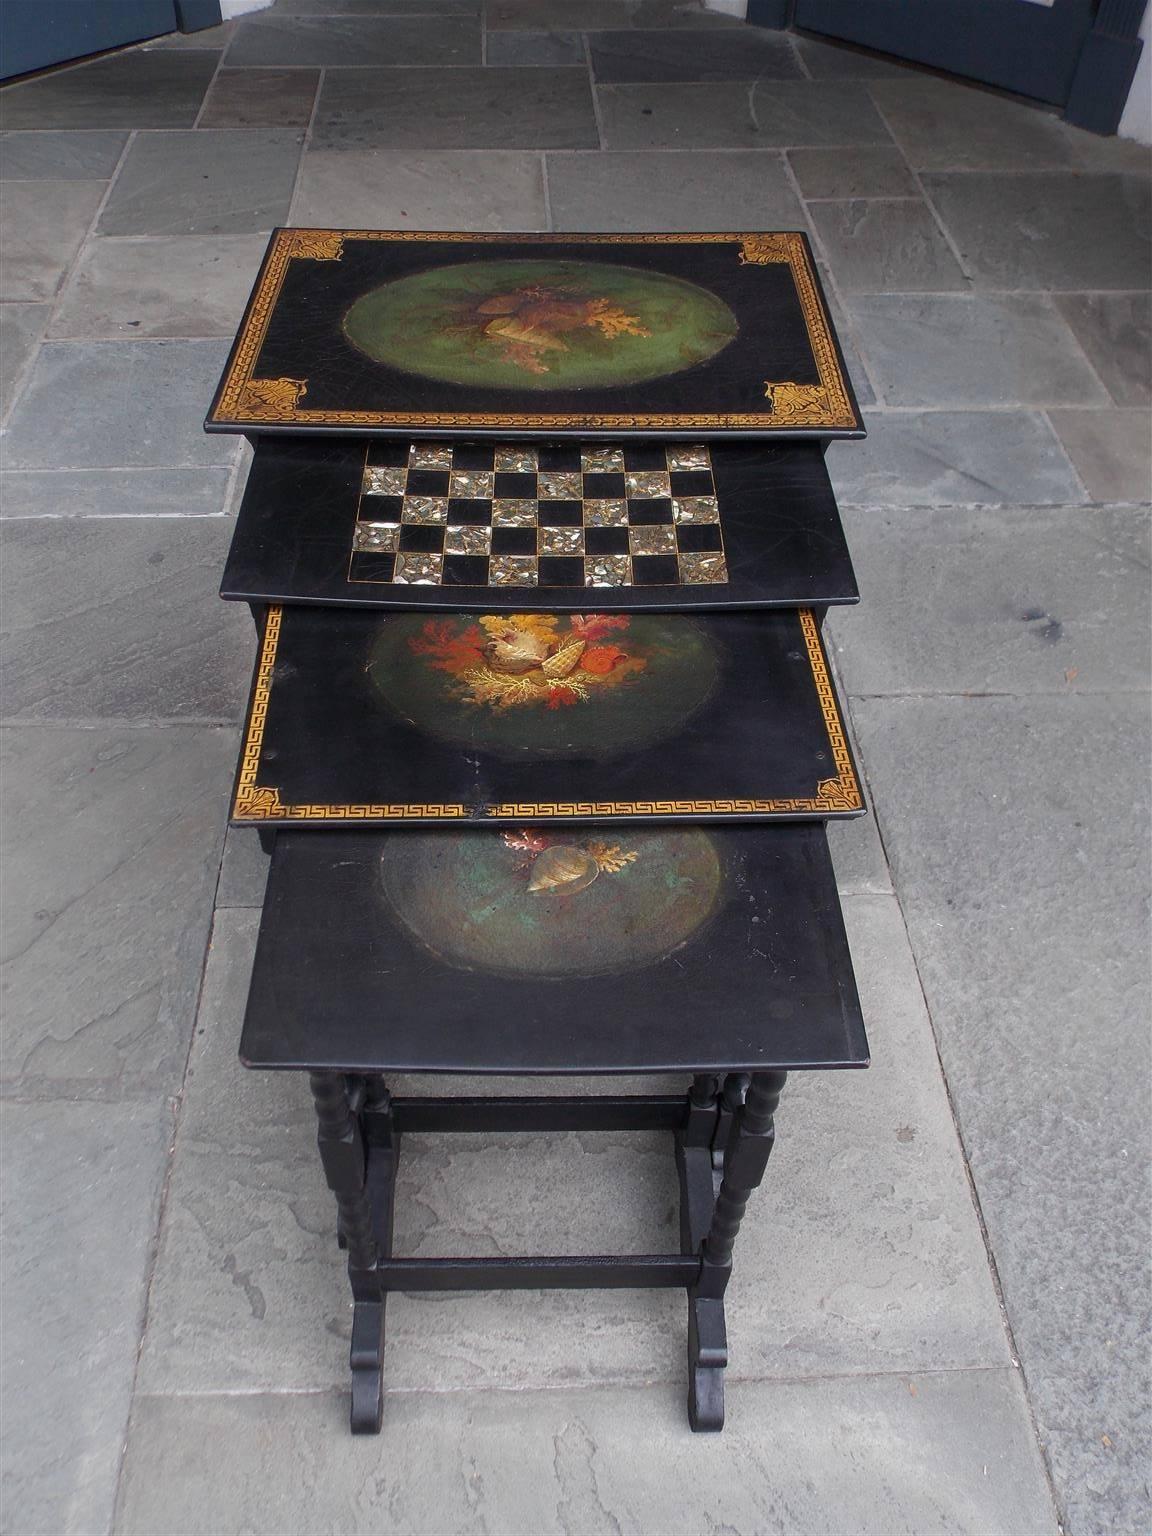 Set of four English Regency paper mâché painted and gilt nest of tables with shell, coral and mother-of-pearl inlaid checker board top. Tables are rectangle in shape with turned bulbous legs and connecting stretchers, Early 19th Century.